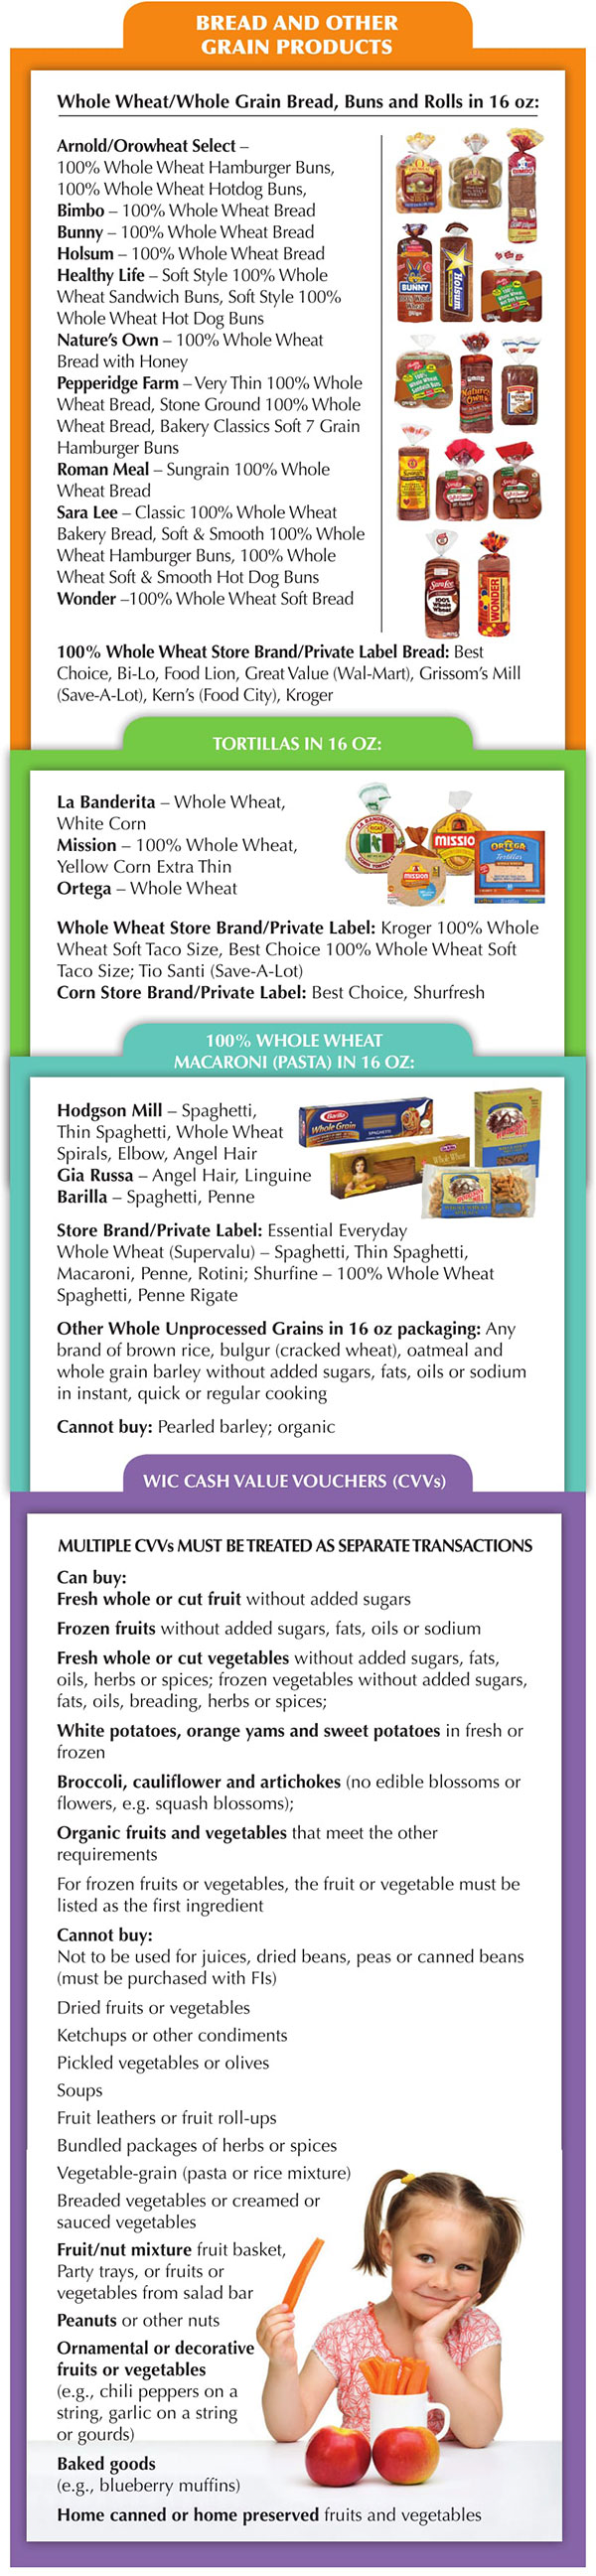 Tennessee WIC Food List Bread, Grain Products, Tortillas, Whole Wheat Pasta and WIC Cash Vouchers